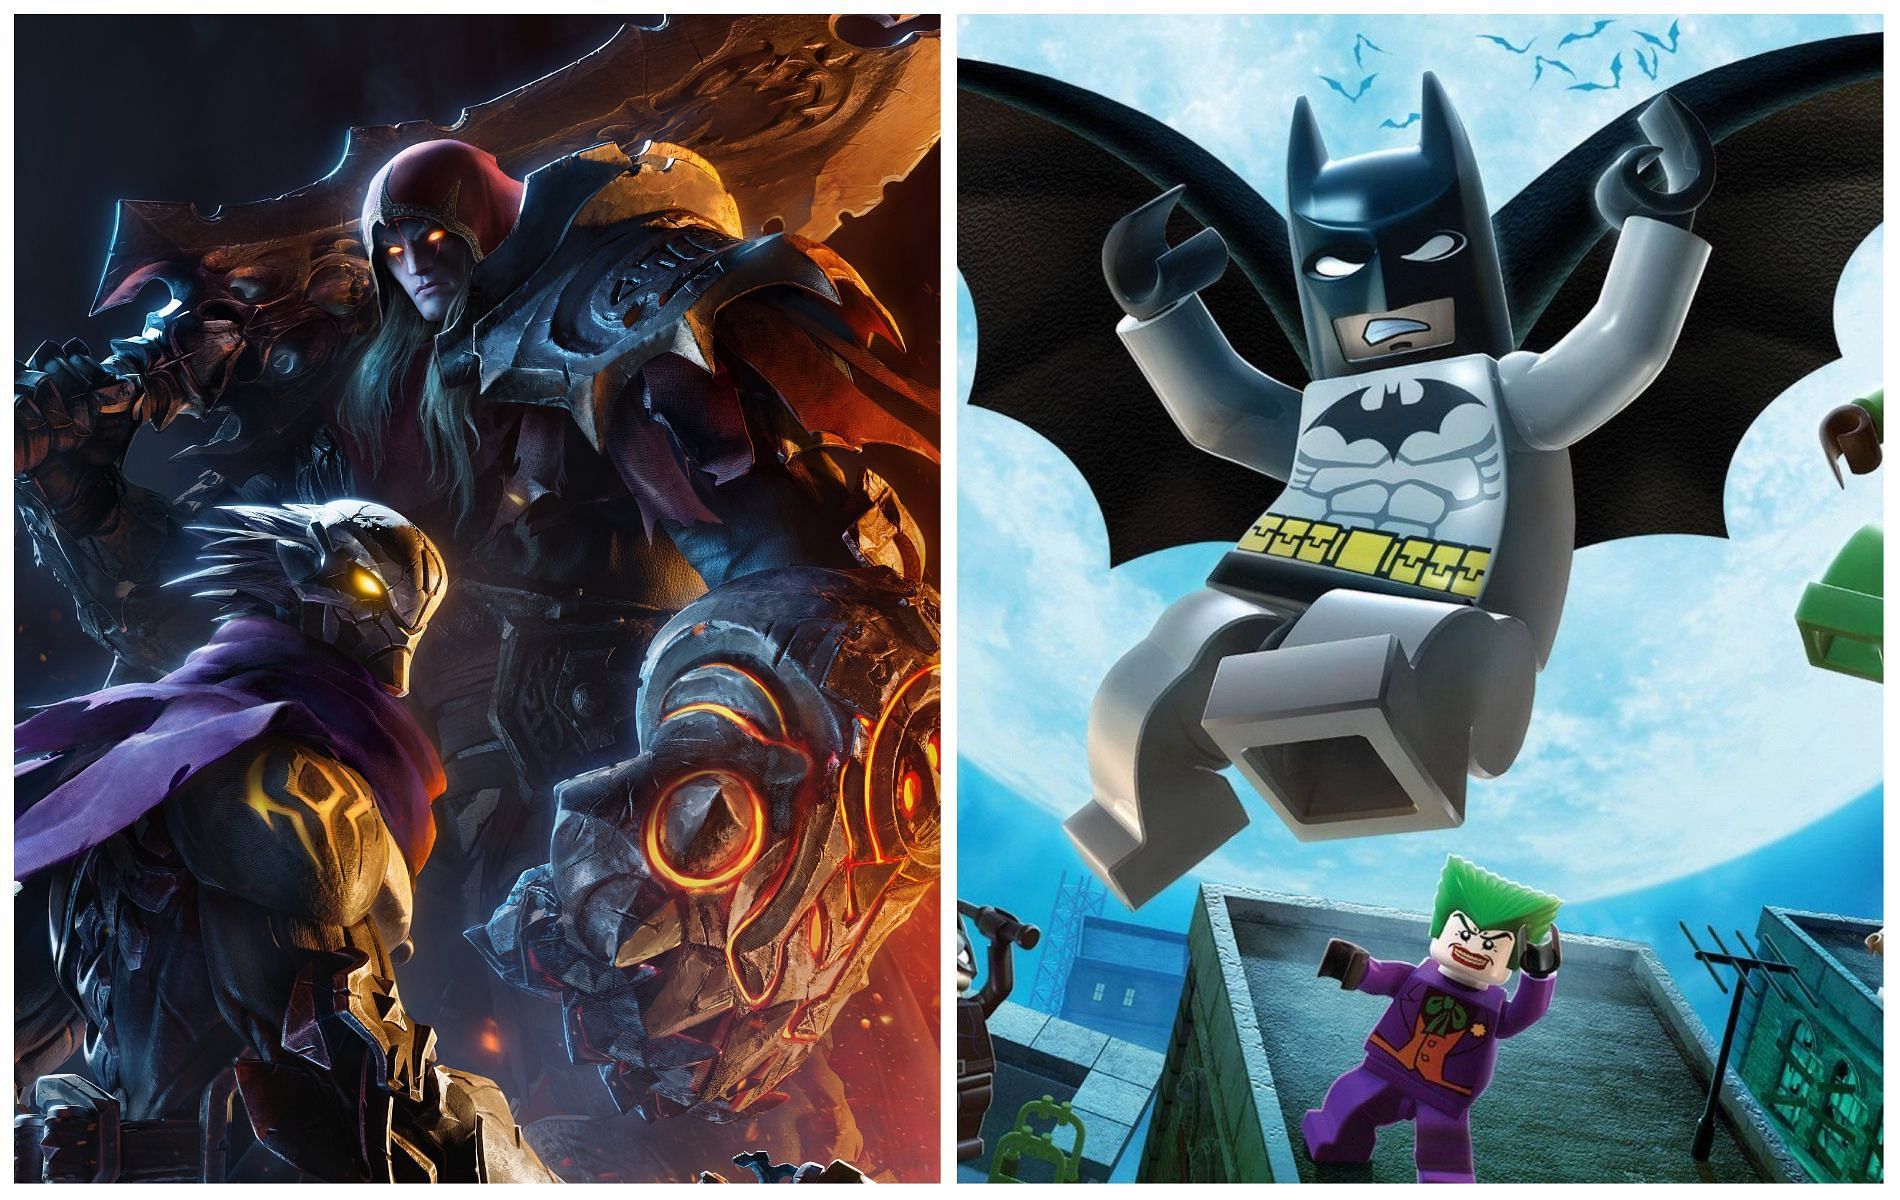 Co-op video games are fun social gaming experiences to enjoy with friends (Images via THQ Nordic and Warner Bros.)